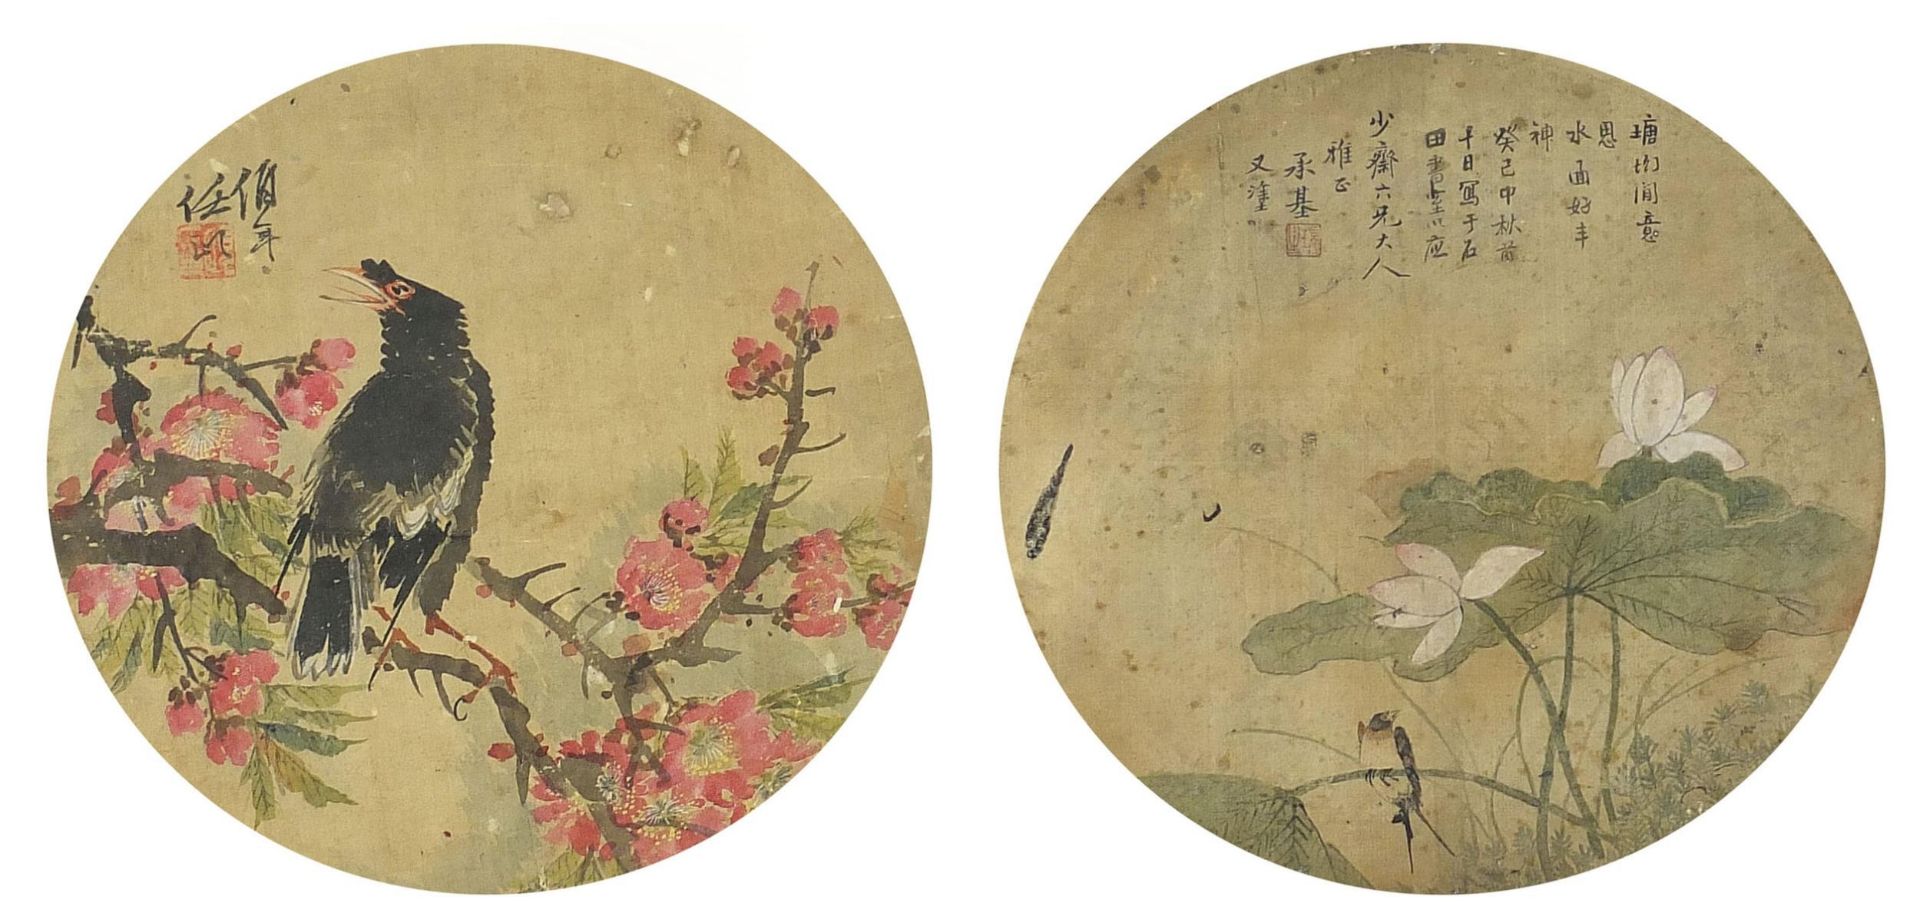 Birds of paradise amongst flowers, two Chinese circular watercolours on silk, each with character